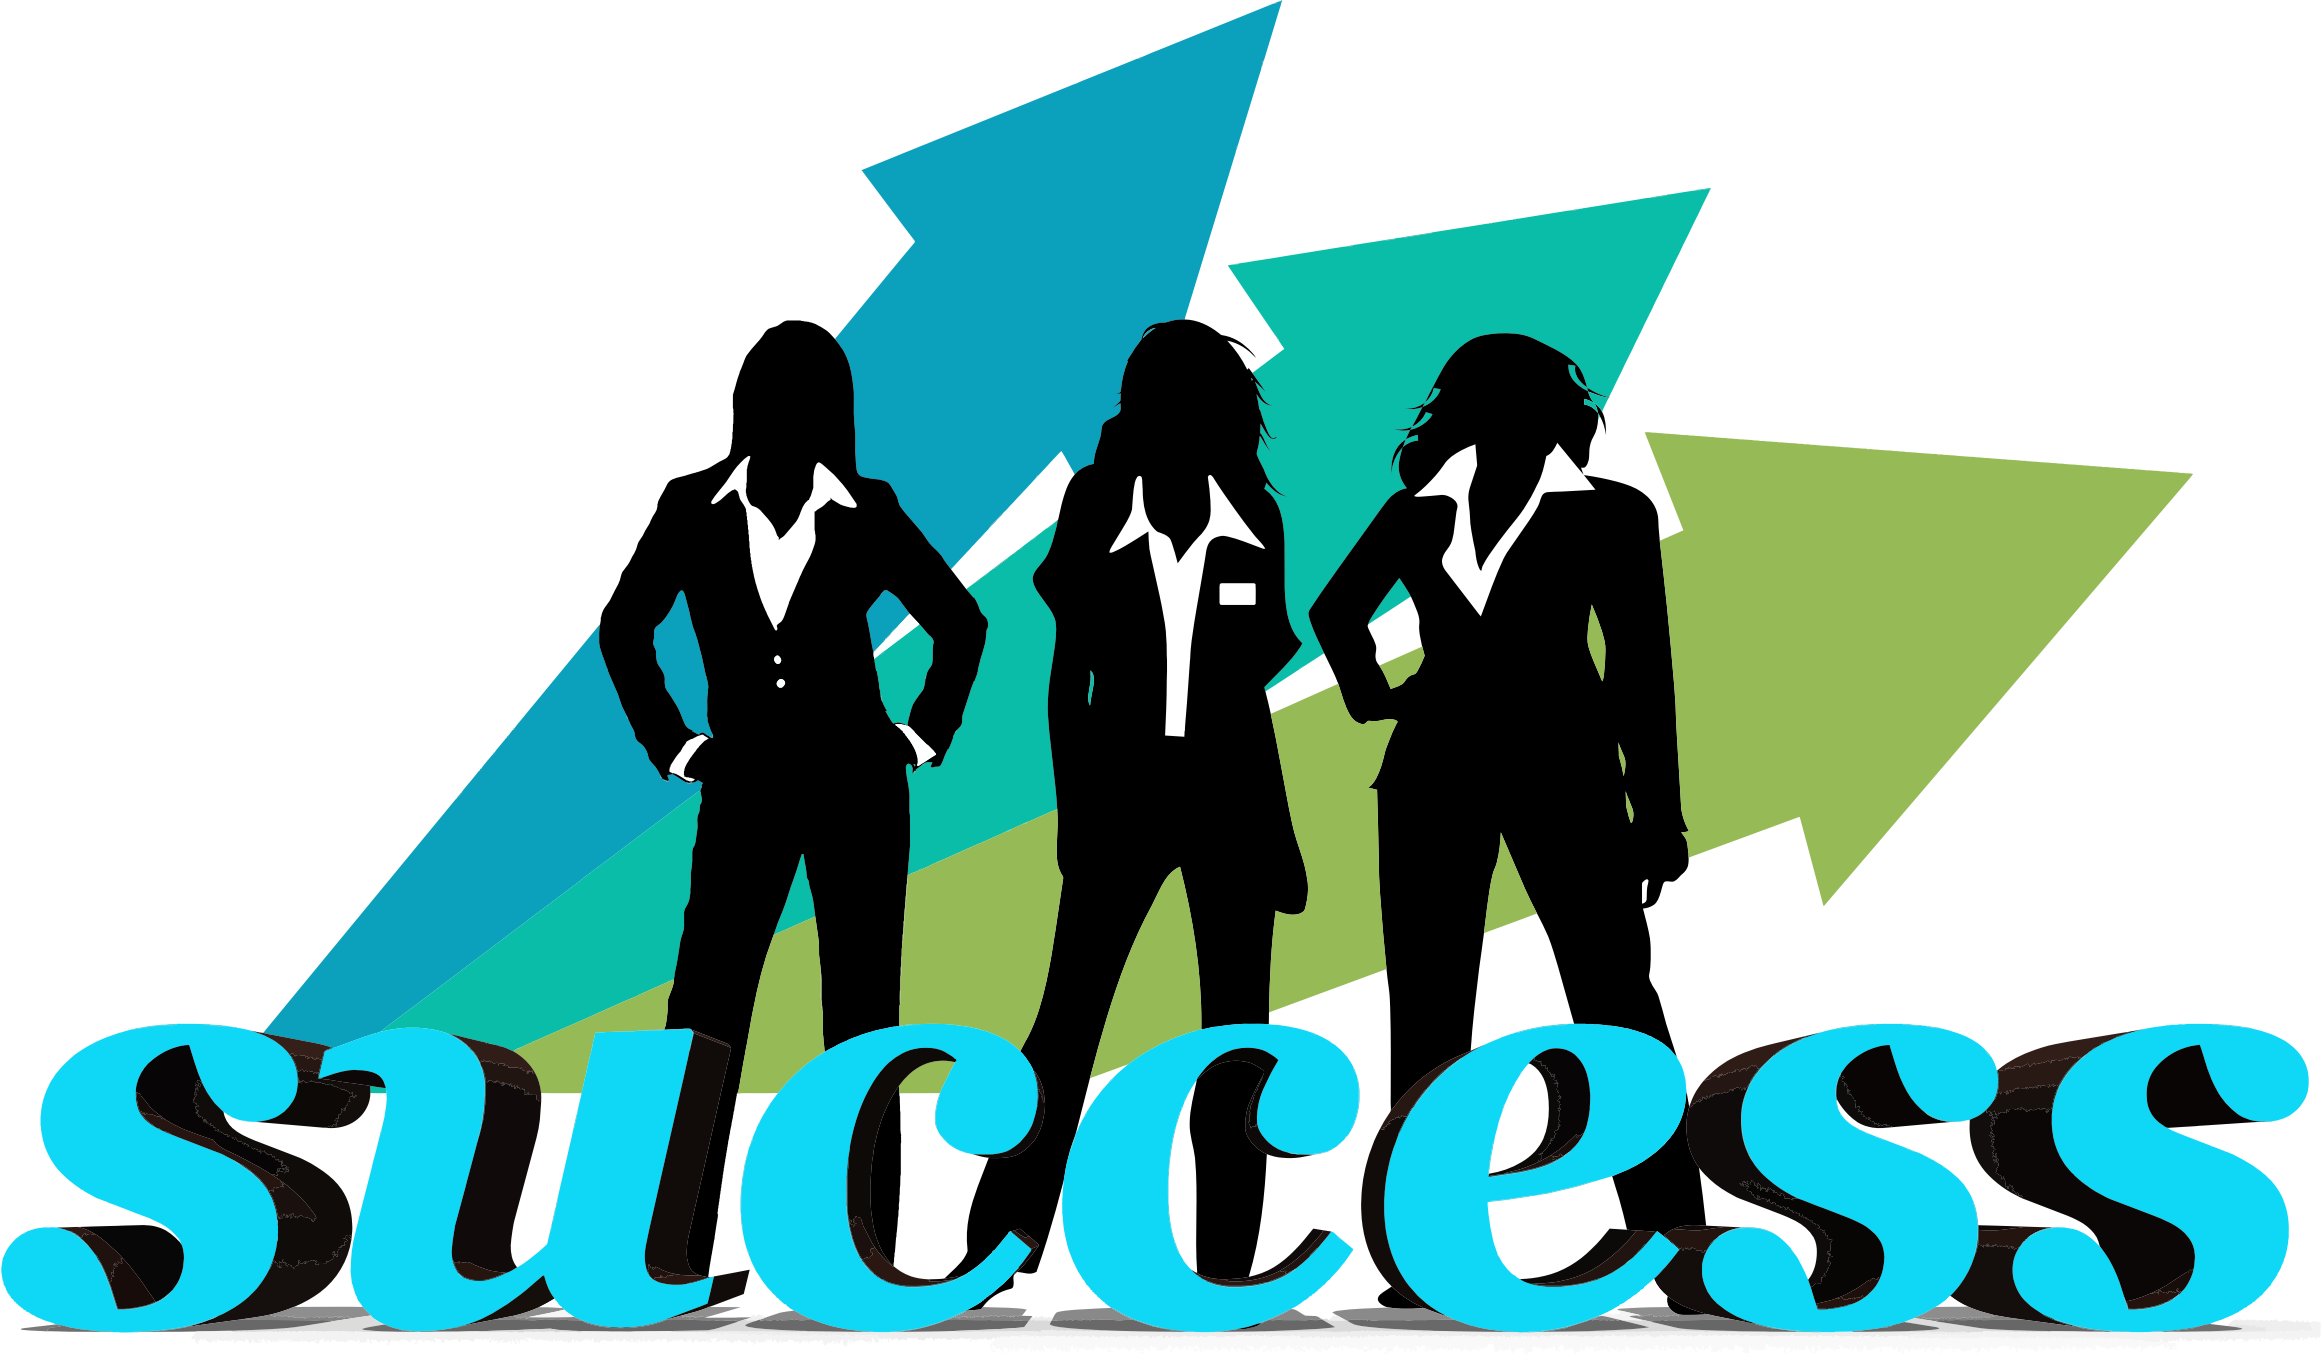 Free business success cliparts download clip art png.